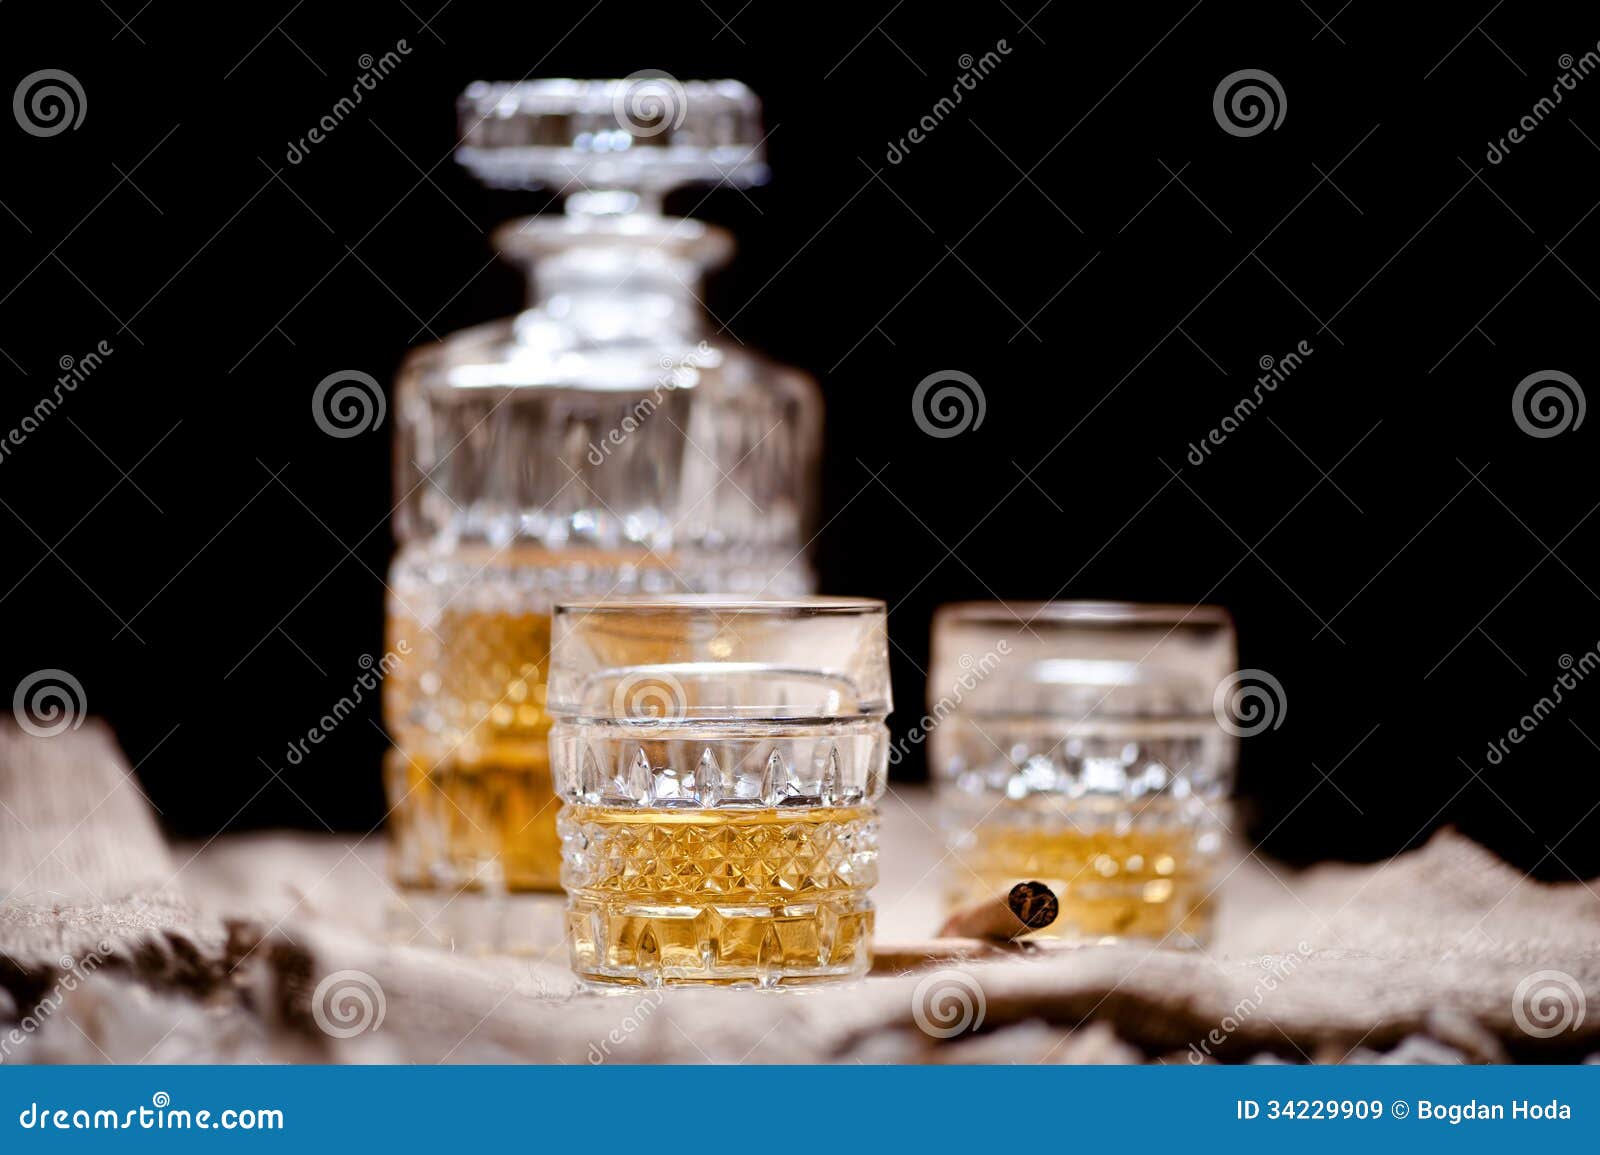 whiskey crystal bottle and glasses with alcoholic booze